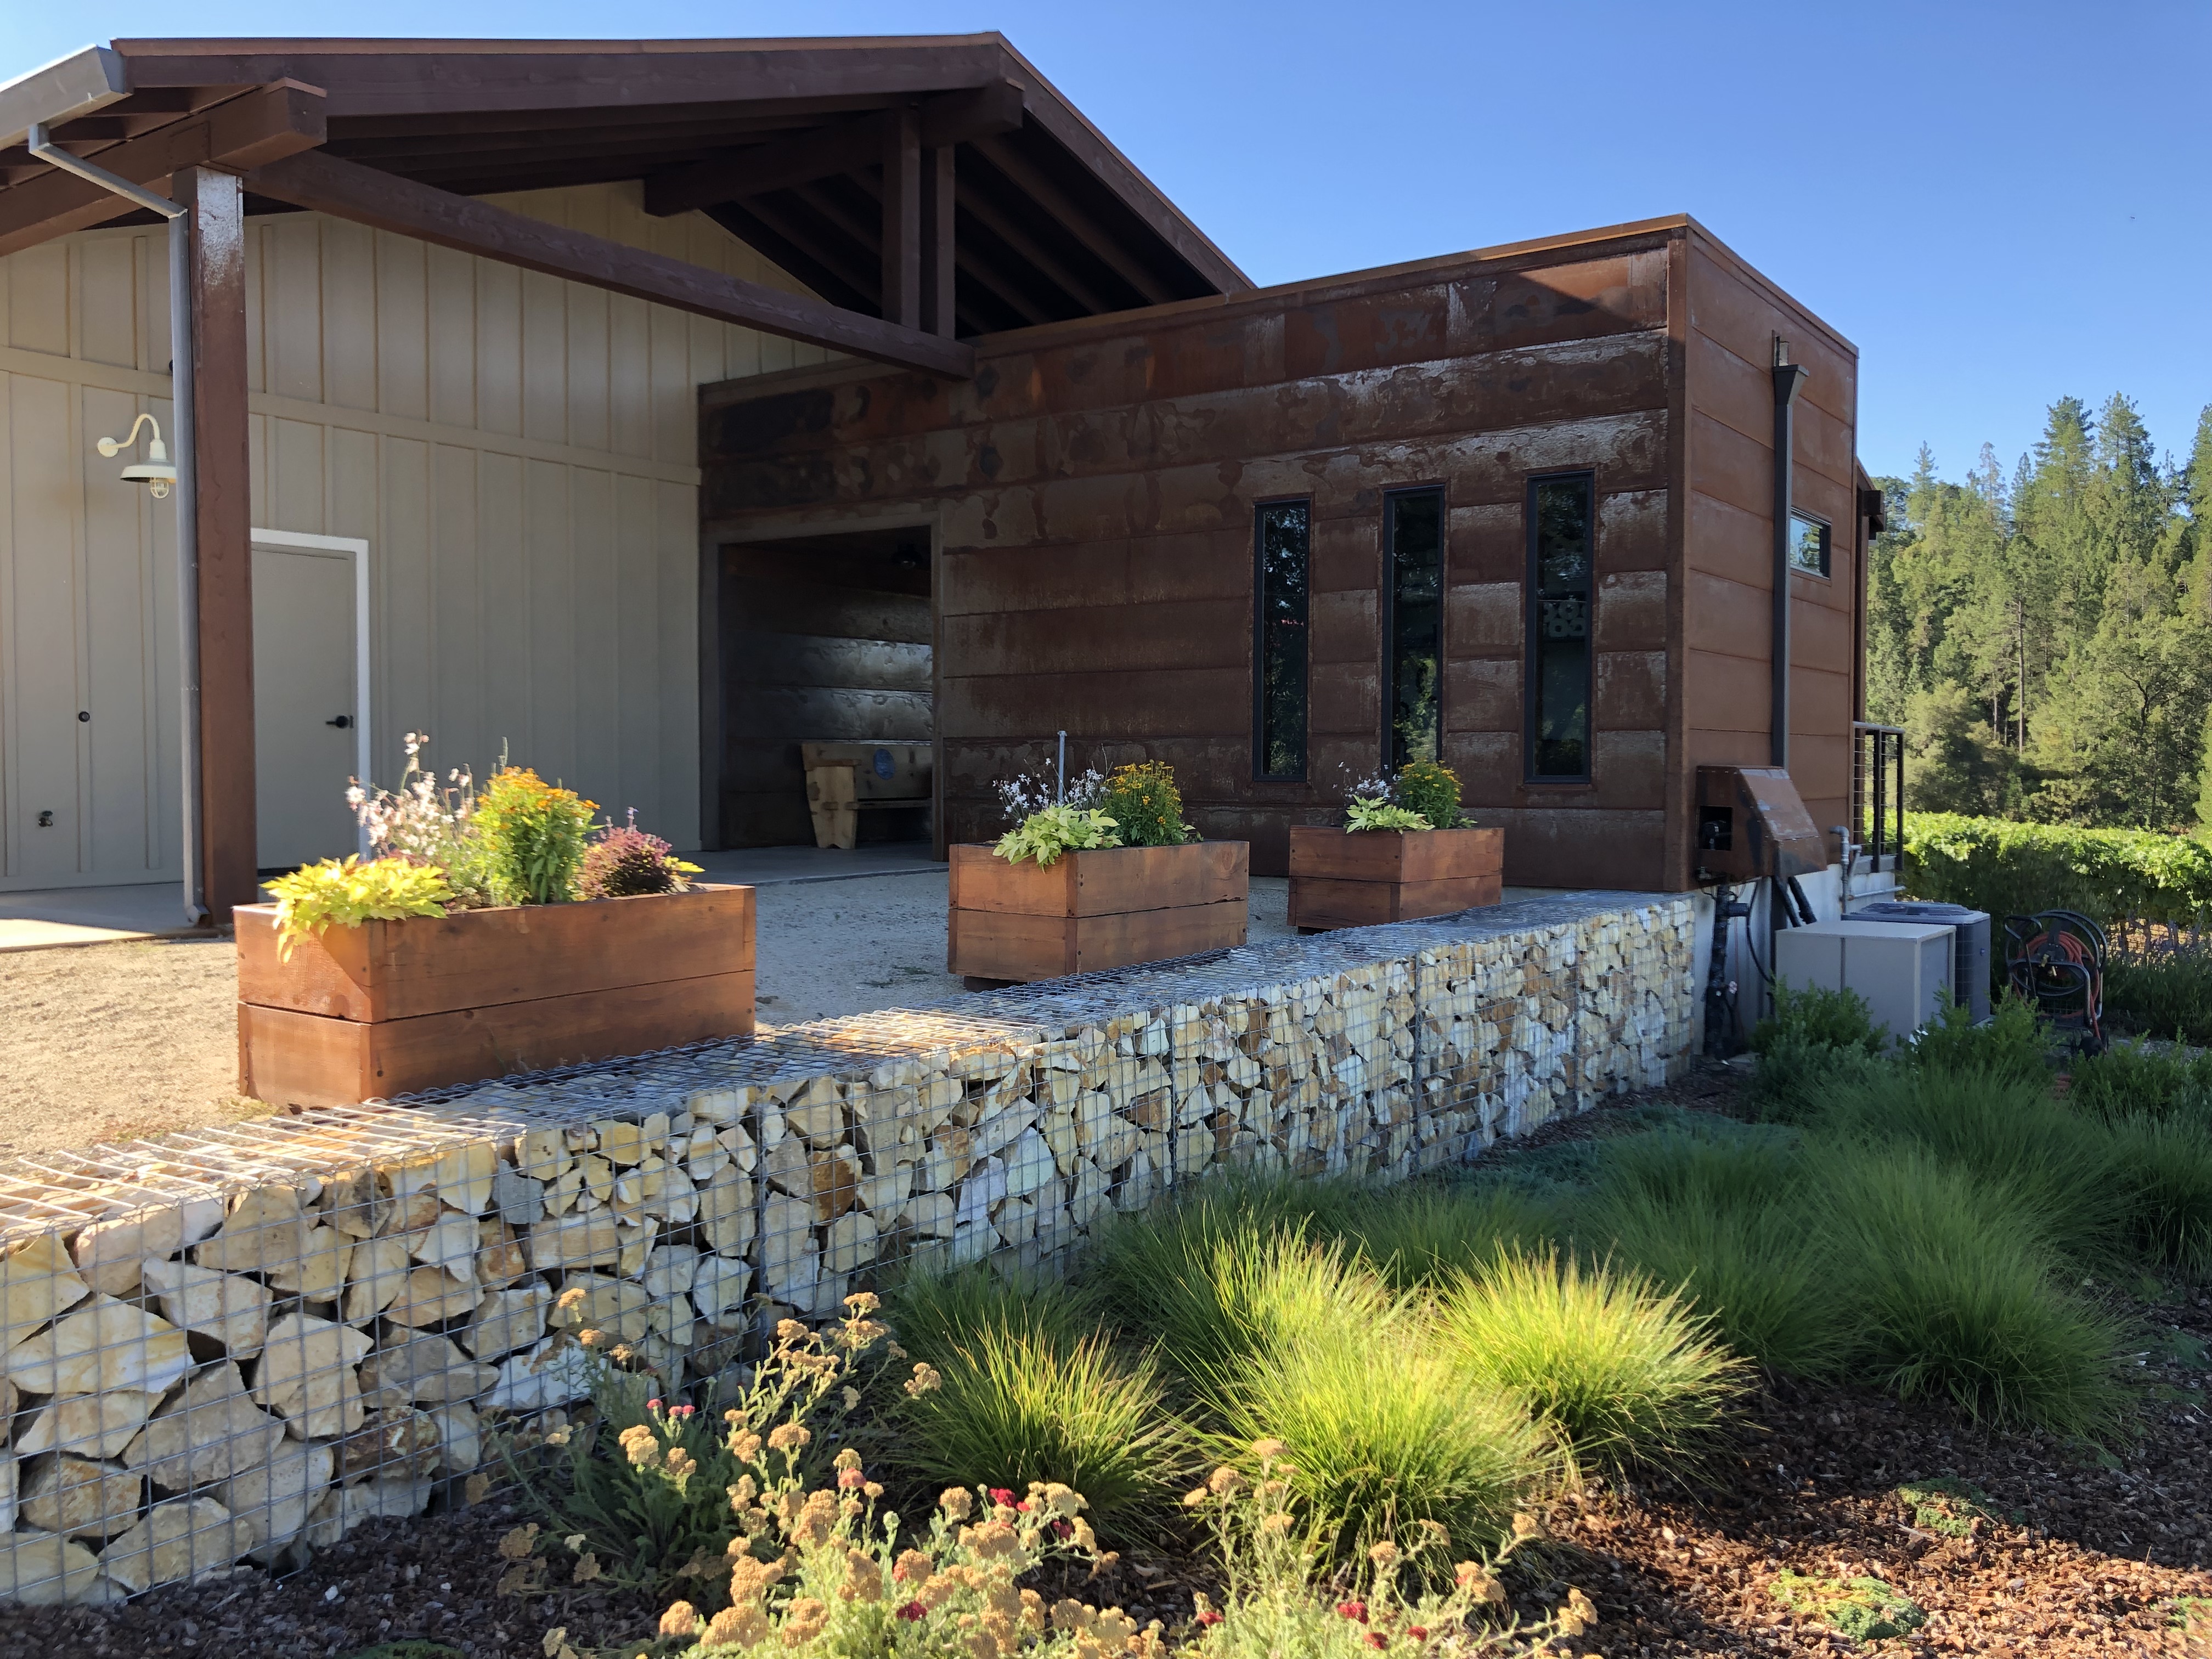 Image showing outside of Element 79 tasting room with rock foundation and rustic metal exterior.